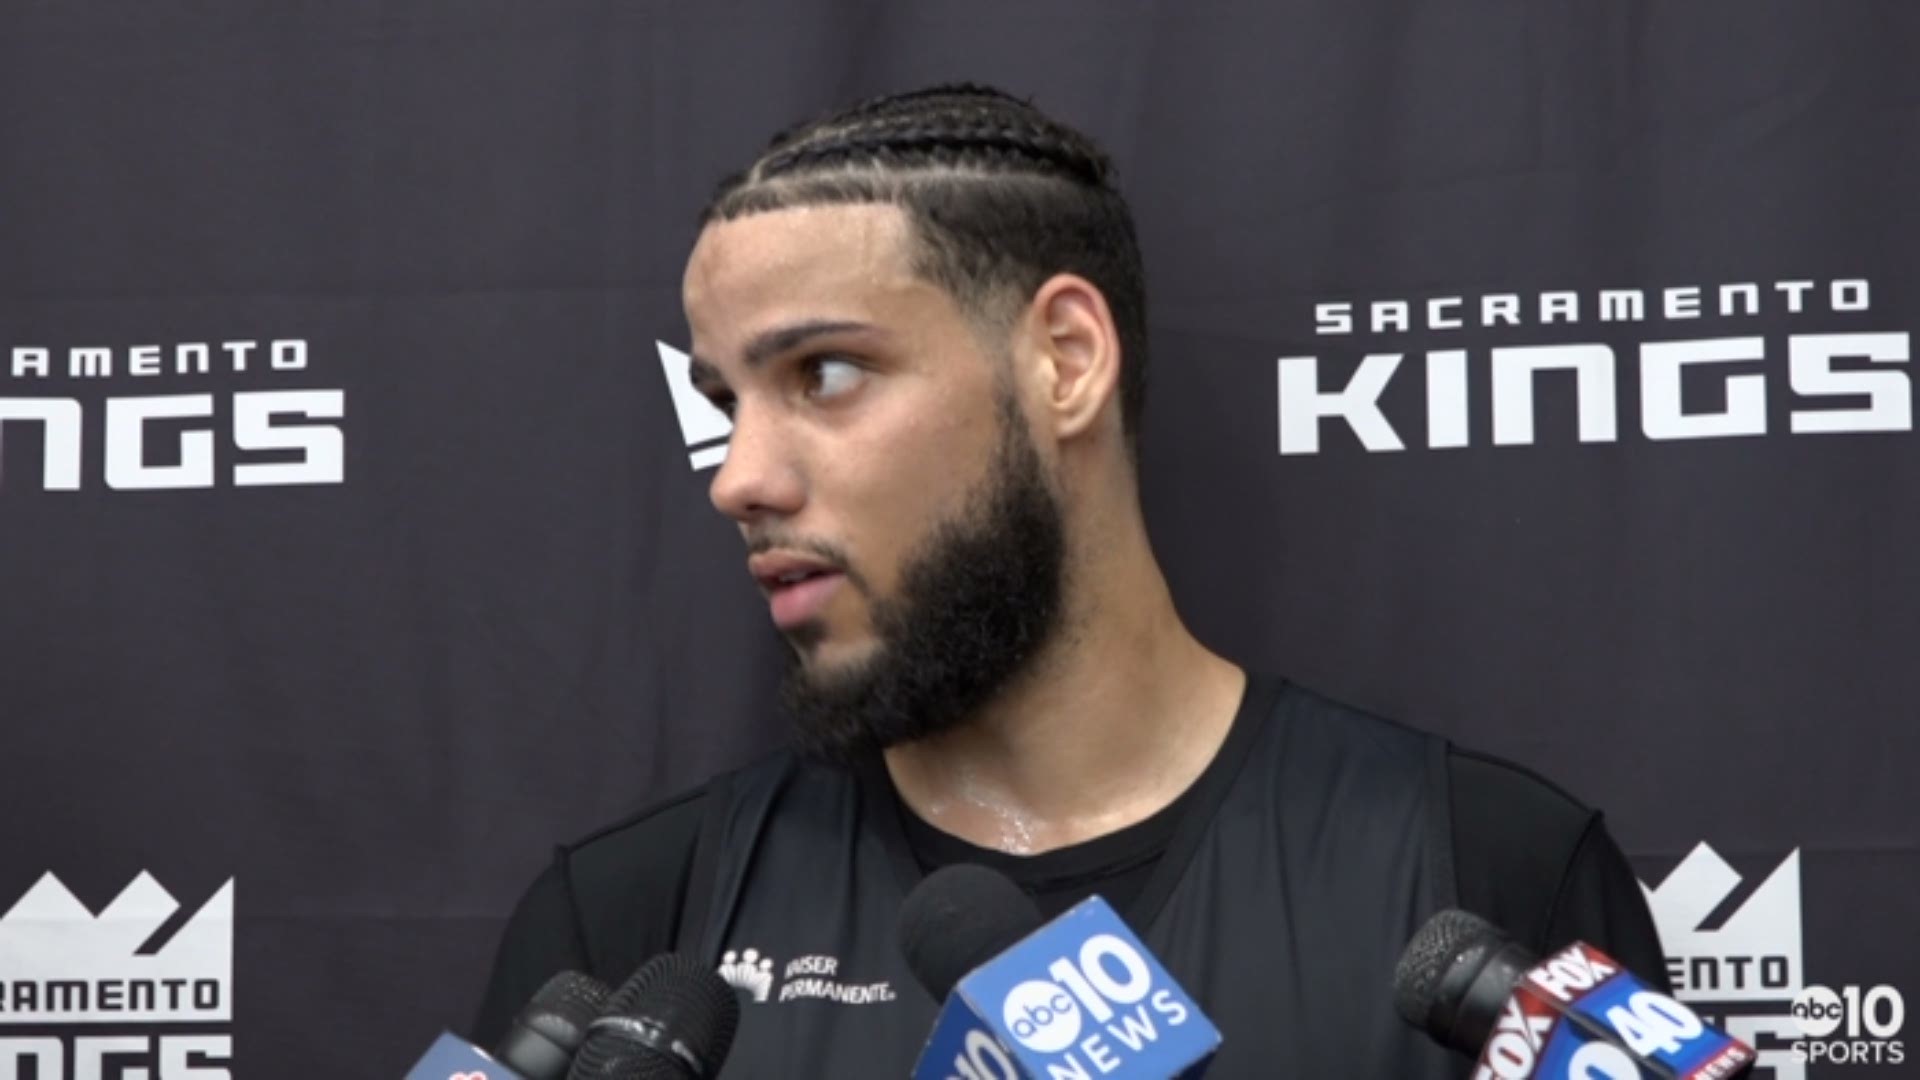 University of Nevada-Reno forward Caleb Martin talks about his draft workout in Sacramento with the Kings and his upcoming decision to either head to the NBA or return to the Wolfpack.